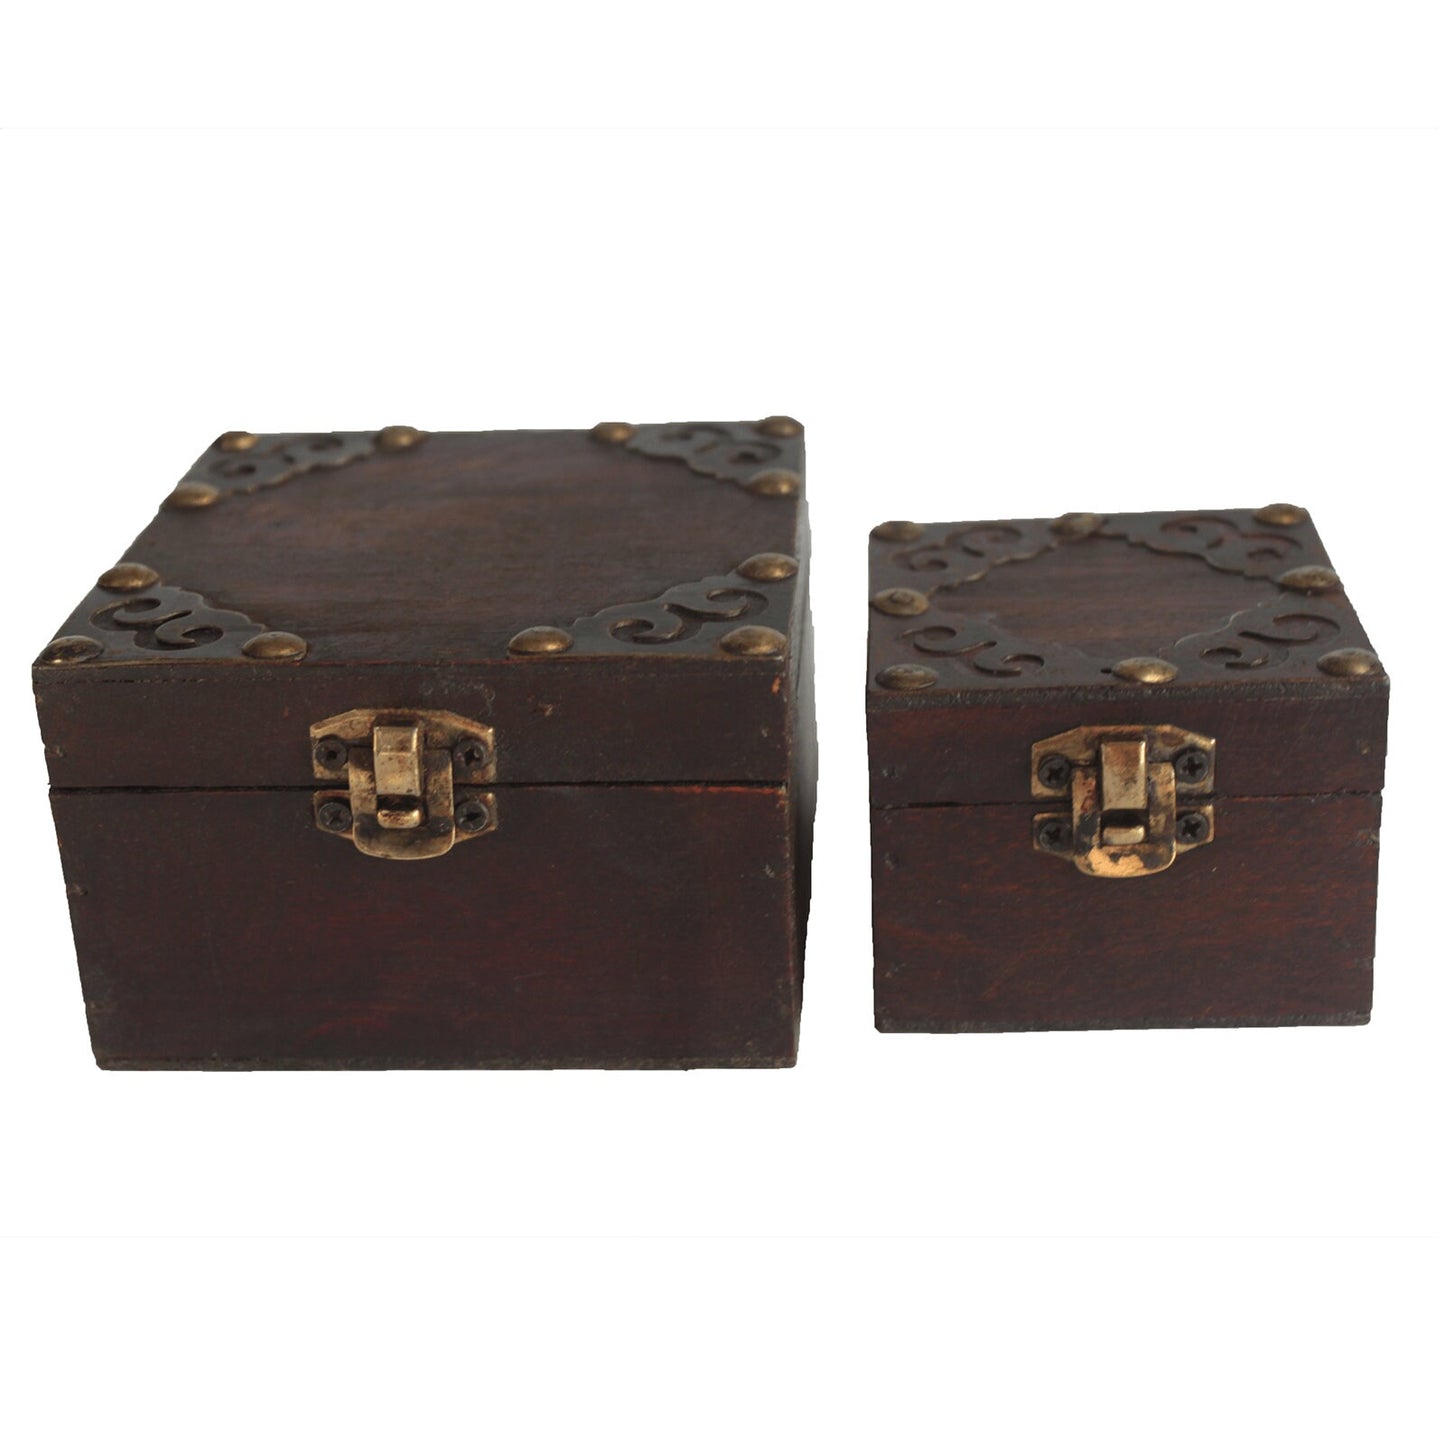 Set of 2 hand-made wooden Gothic/steampunk Square Boxes -antique style with brass catch Etsy